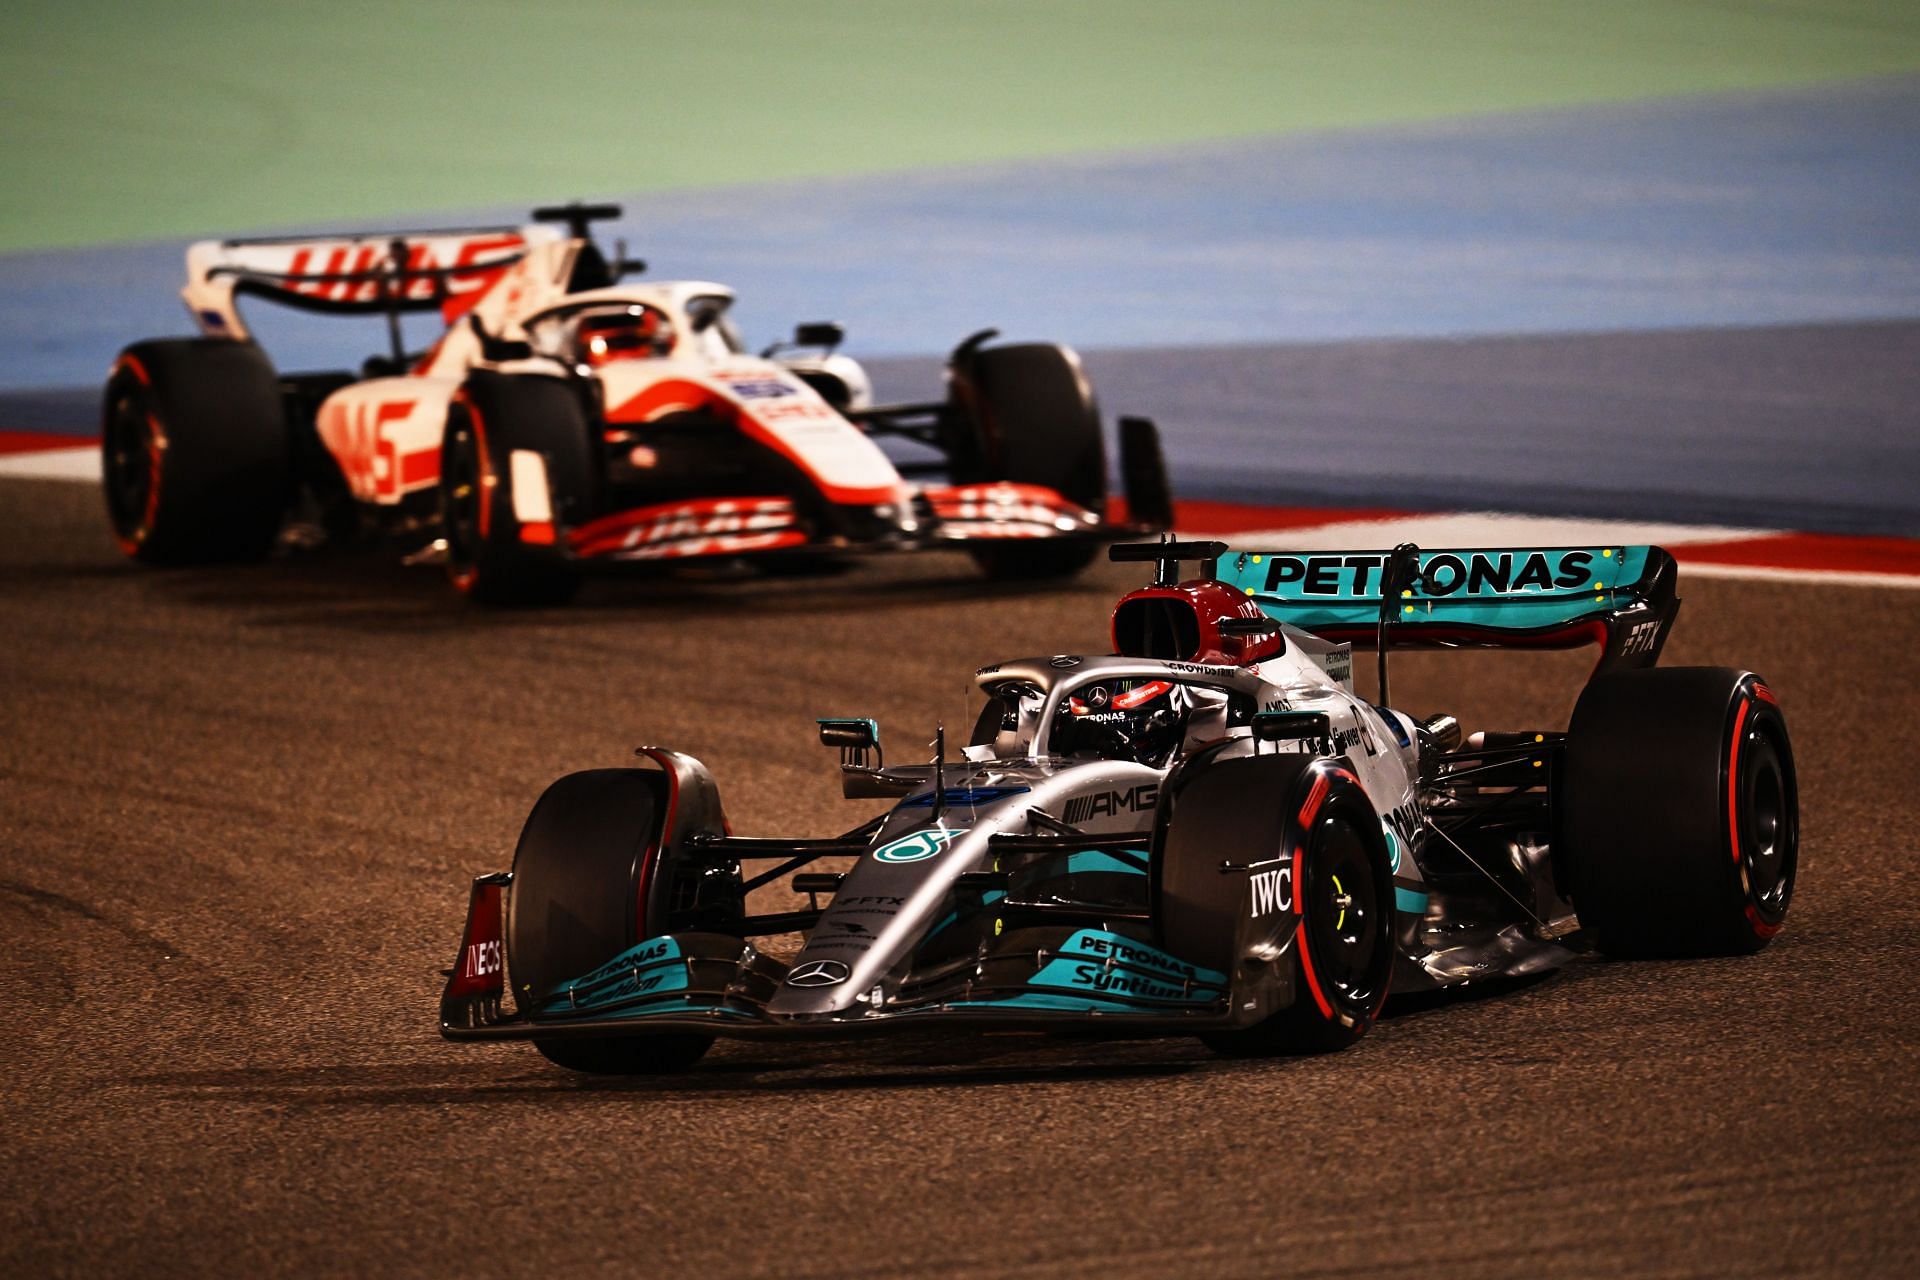 Mercedes finds itself on the backfoot this season